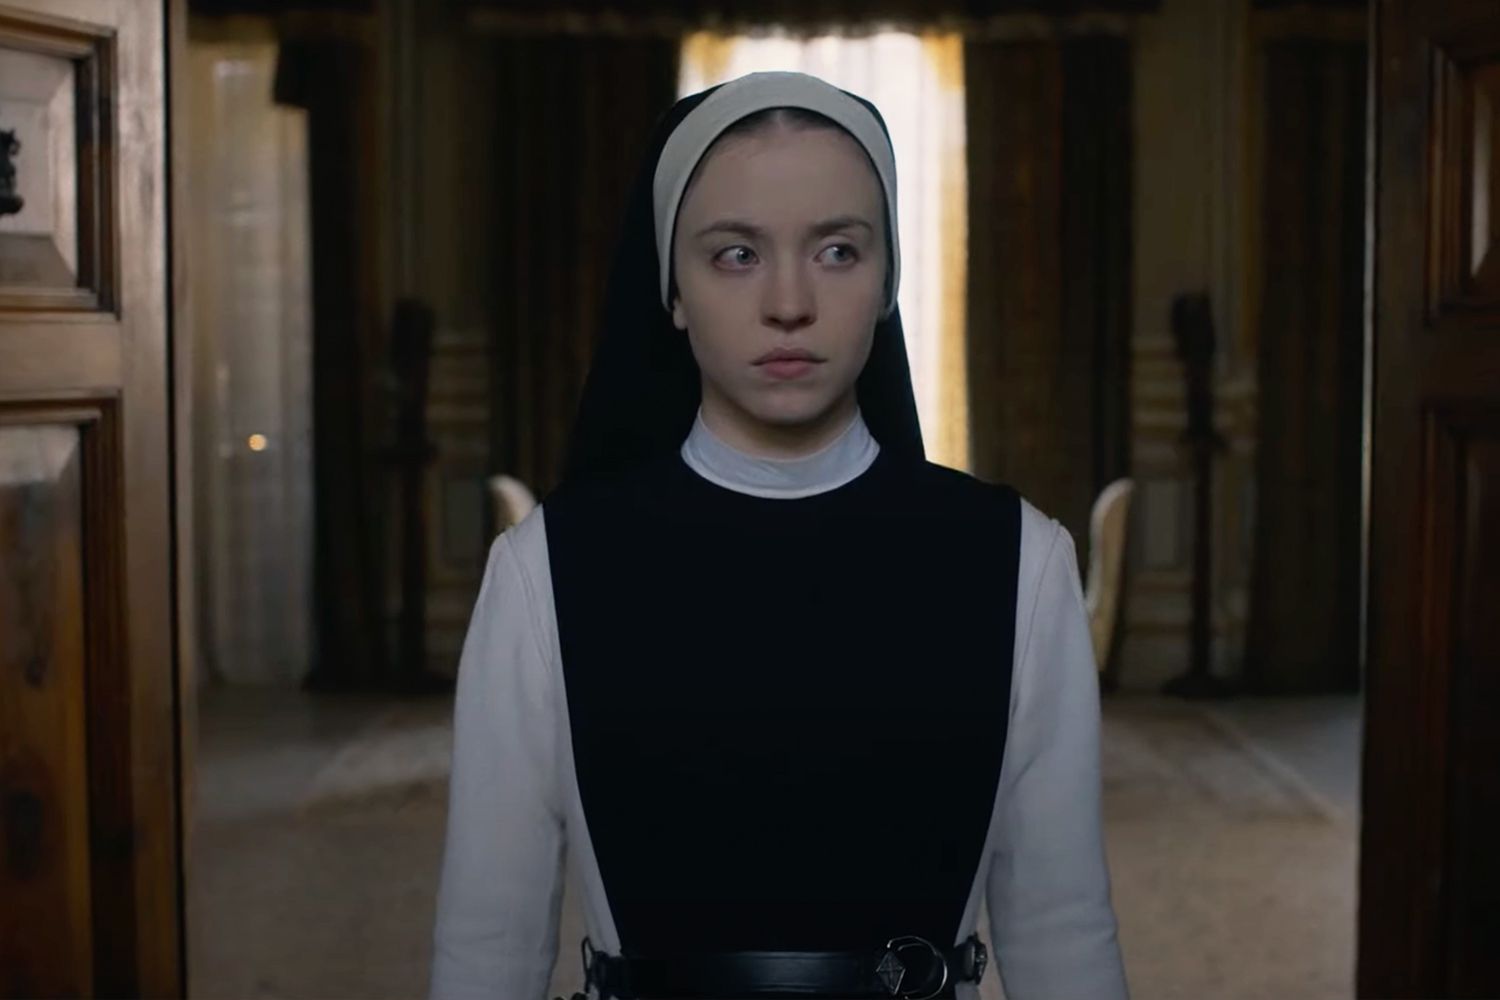 Sydney-Sweeney-Plays-a-Nun-Experiencing-a-Hellish-Miracle-in-Creepy-Trailer-for-Immaculate-012524-a7ec0cfcc9e943a08a1d3ae0e16bcfd9.jpg (1500×1000)